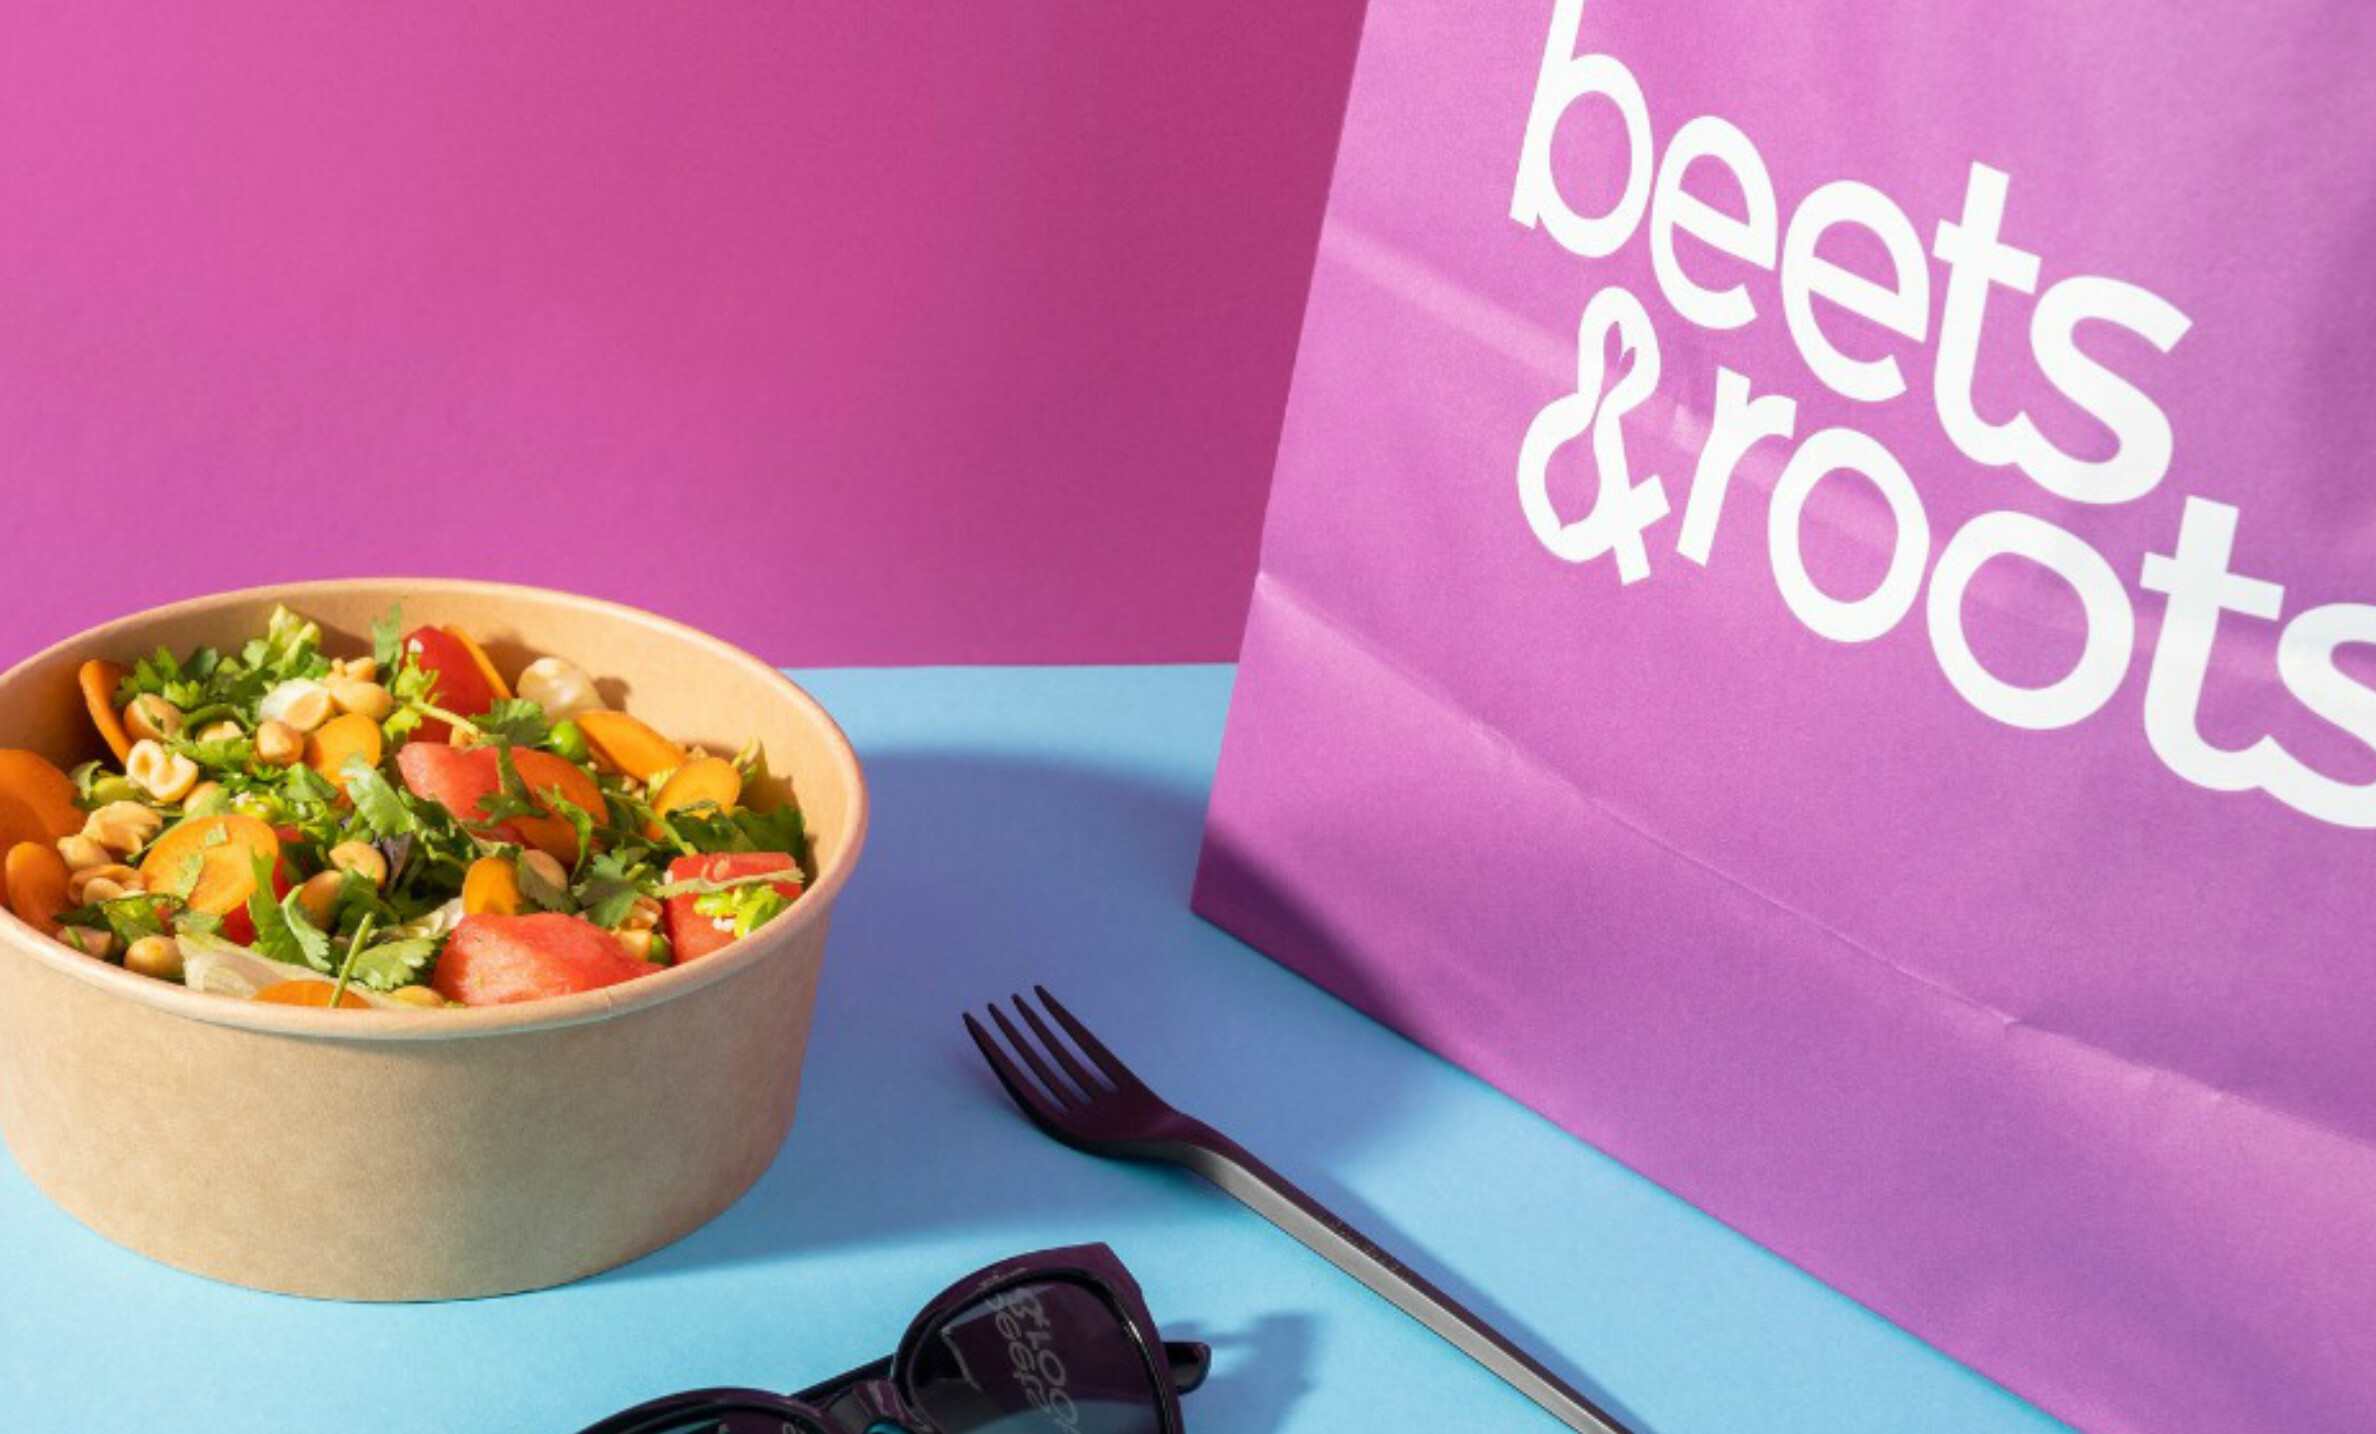 How beets&roots is serving a seamless customer experience